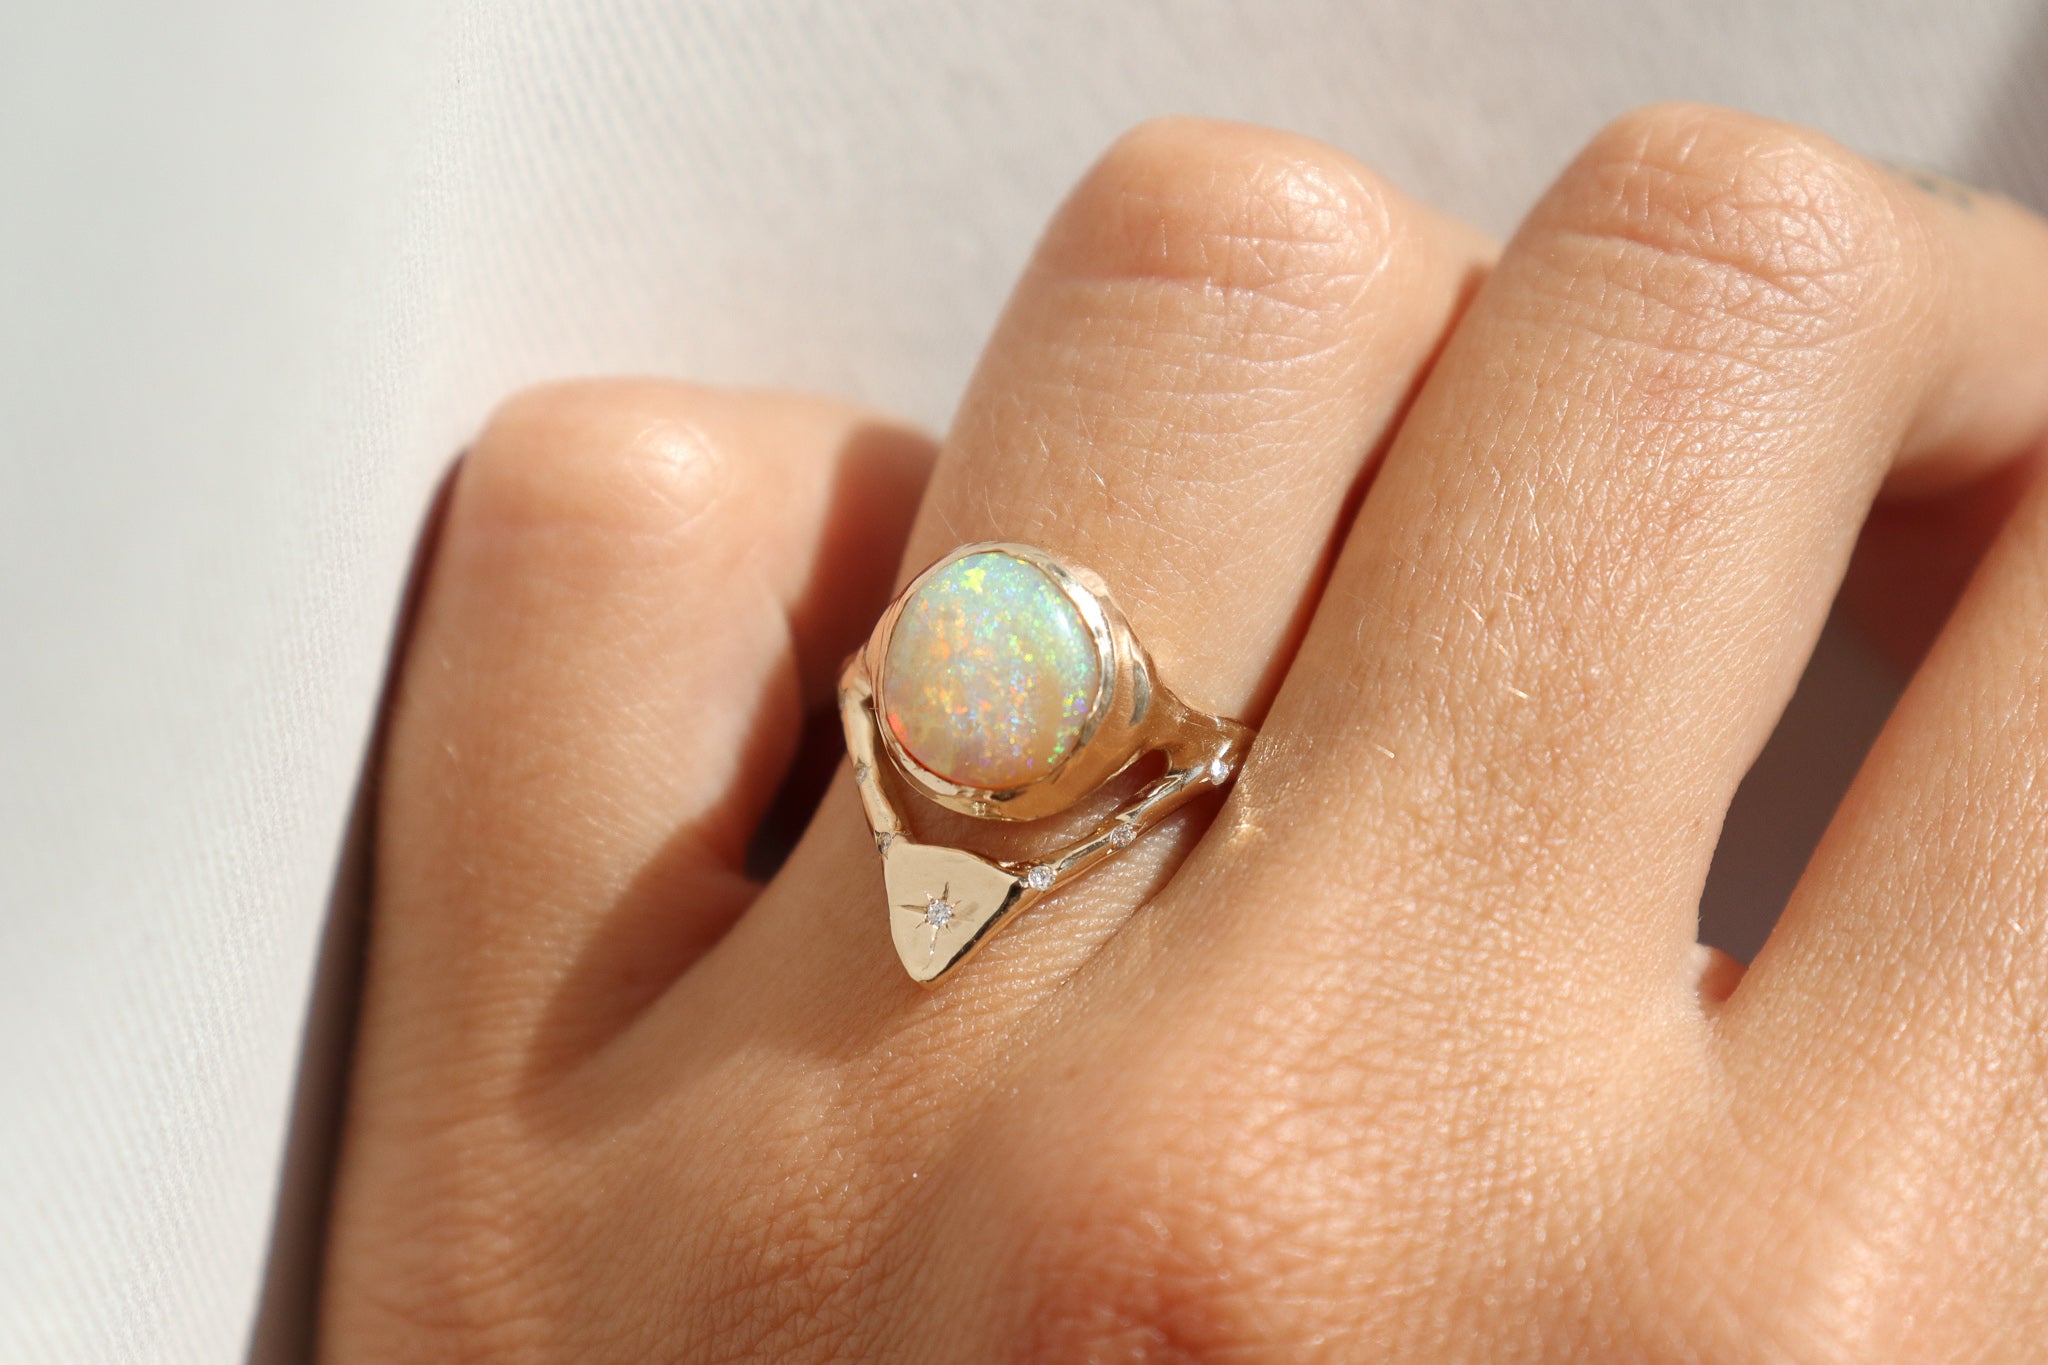 gold opal ring with diamonds is shown on a ring finger in direct sunlight, emphasizing the sparkles in the opal